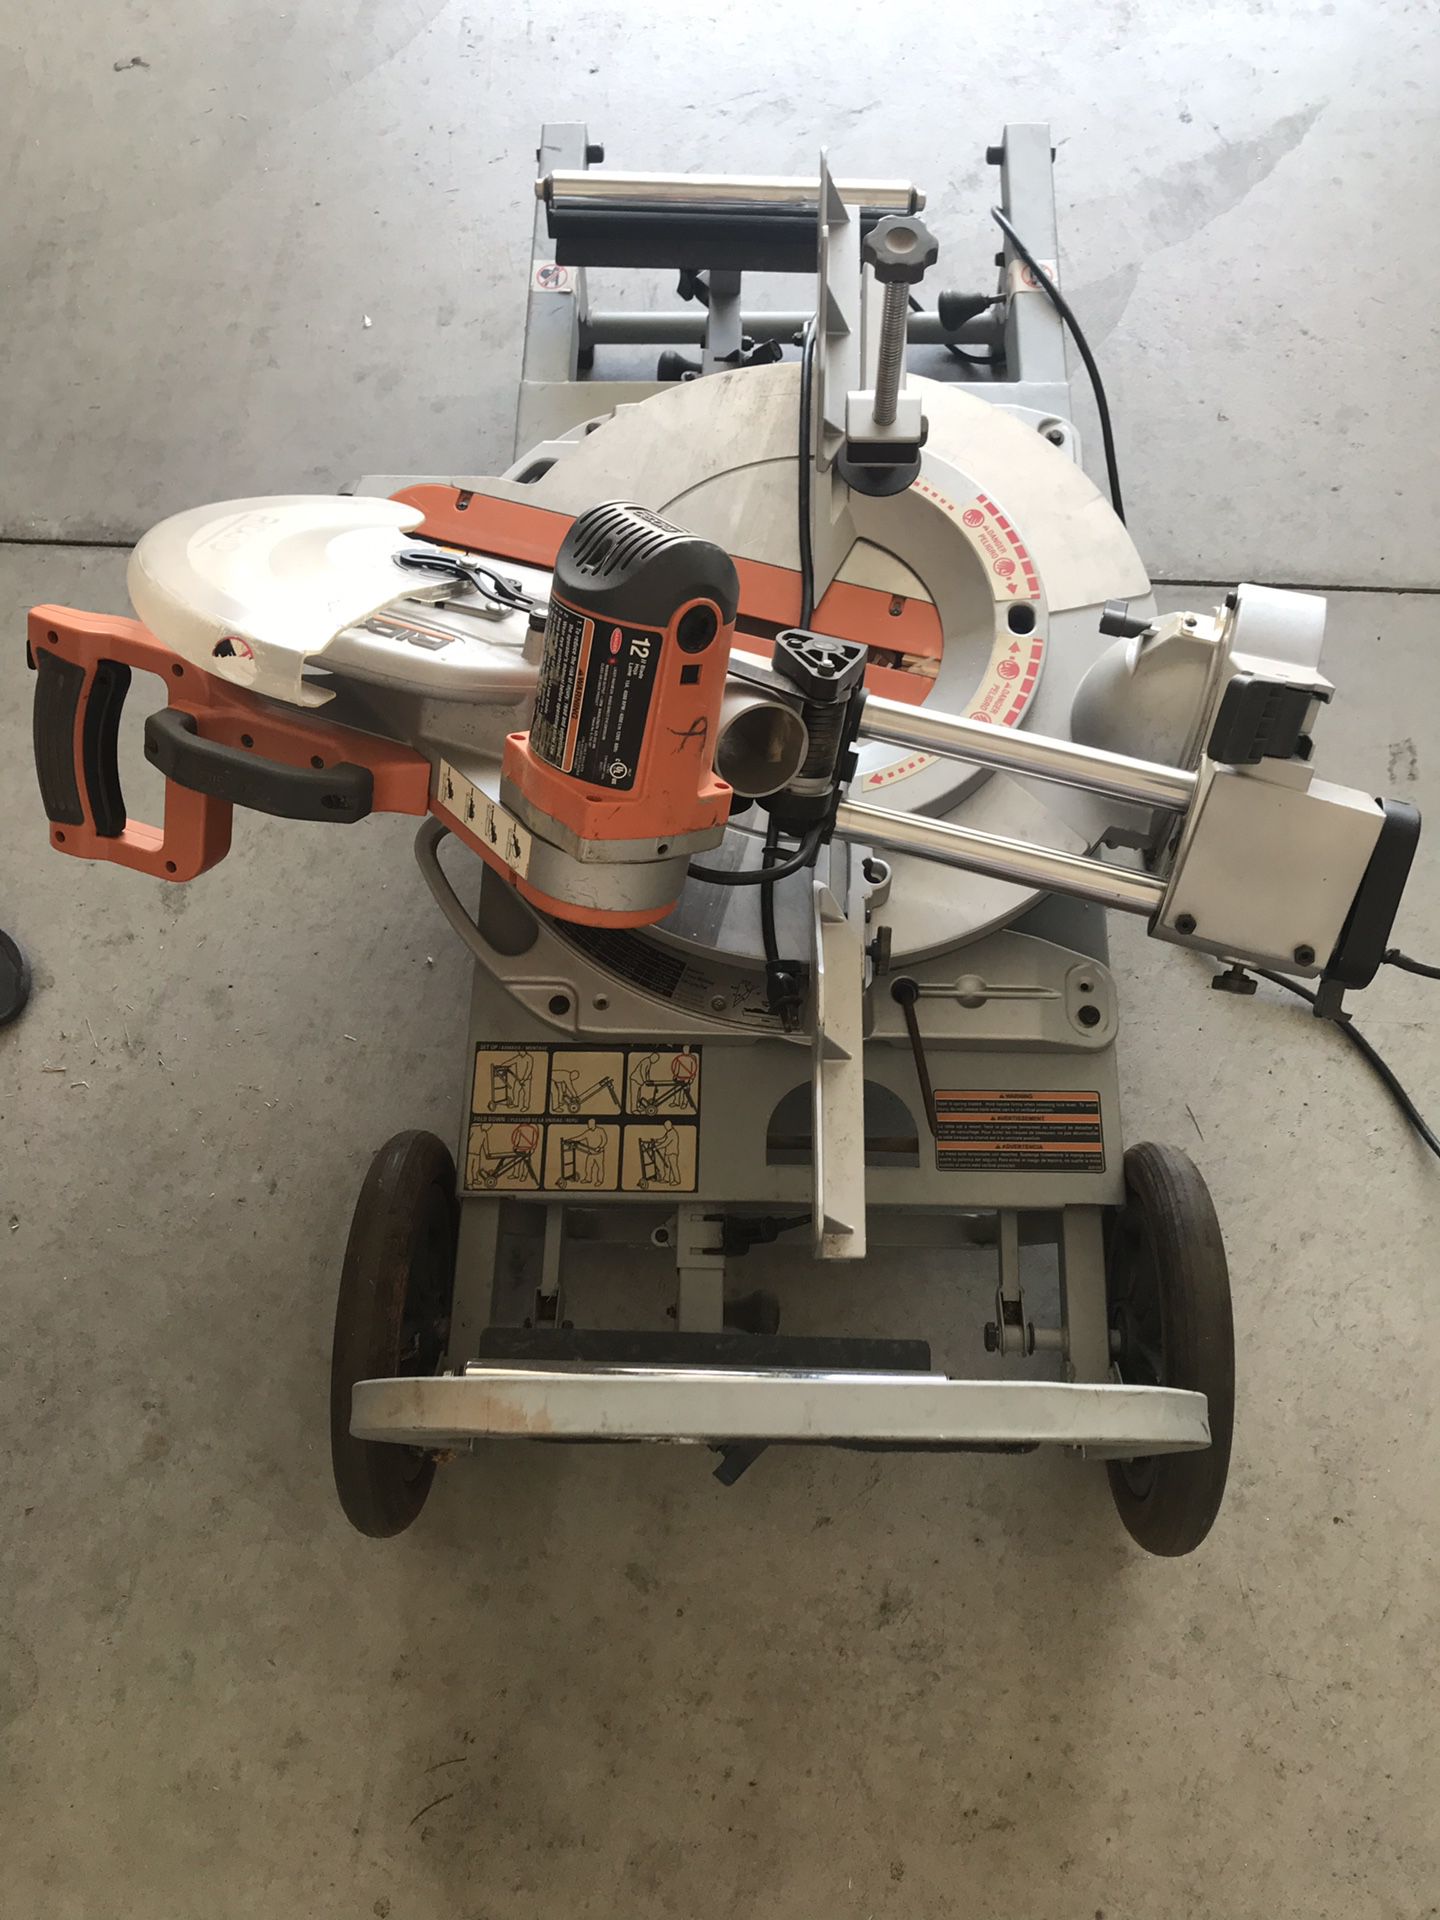 Ridgid MS1290LZ1 inch miter saw with utility vehicle stand